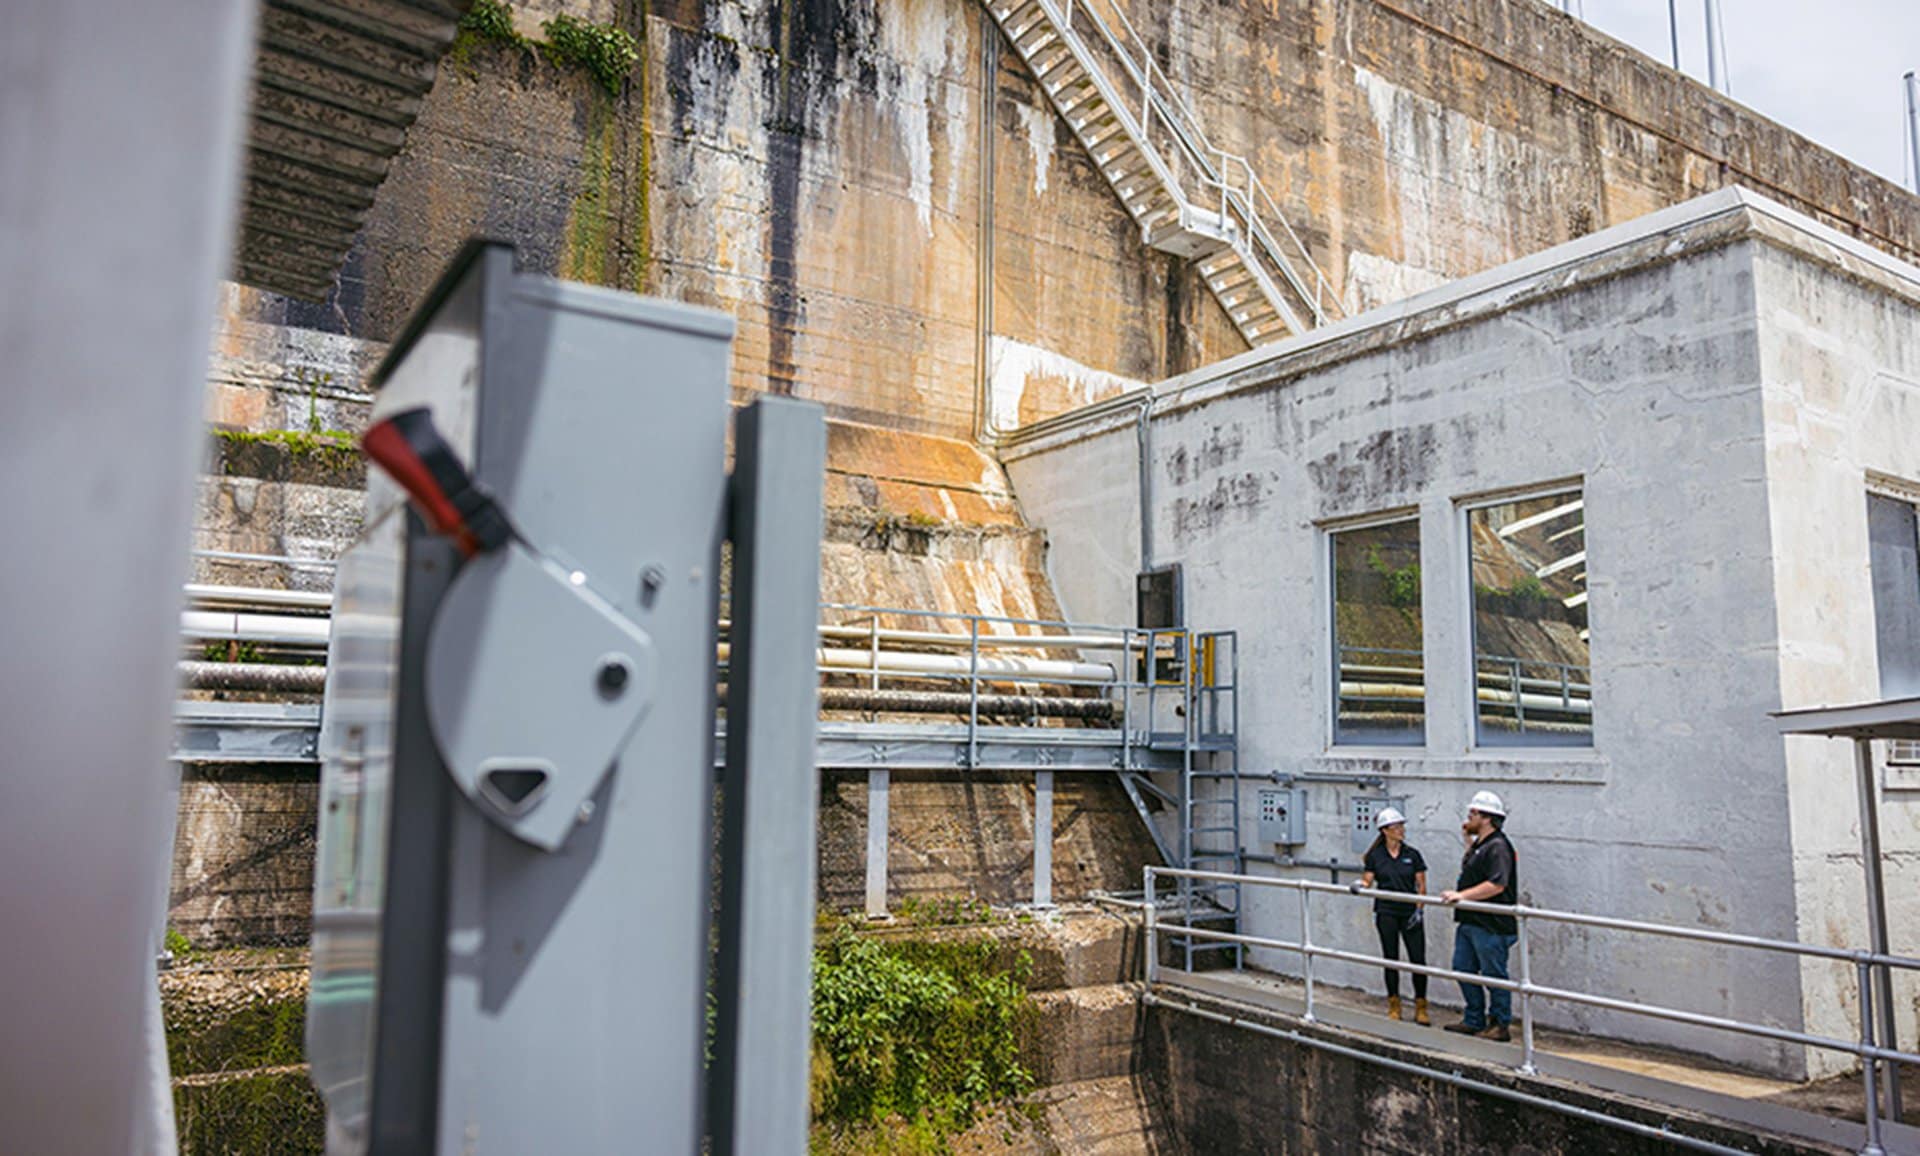 Tillery Hydro, a four-unit conventional hydroelectric plant, was constructed in the 1920s to provide electricity to customers in the Carolinas.